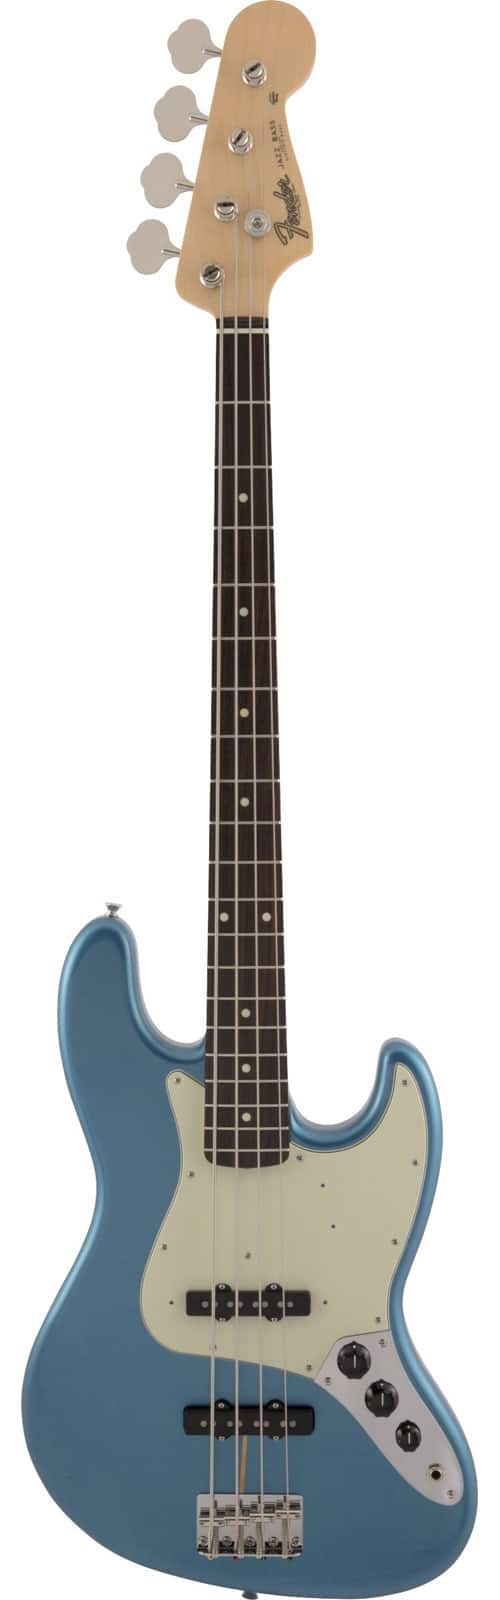 FENDER MADE IN JAPAN TRADITIONAL 60S JAZZ BASS RW, LAKE PLACID BLUE